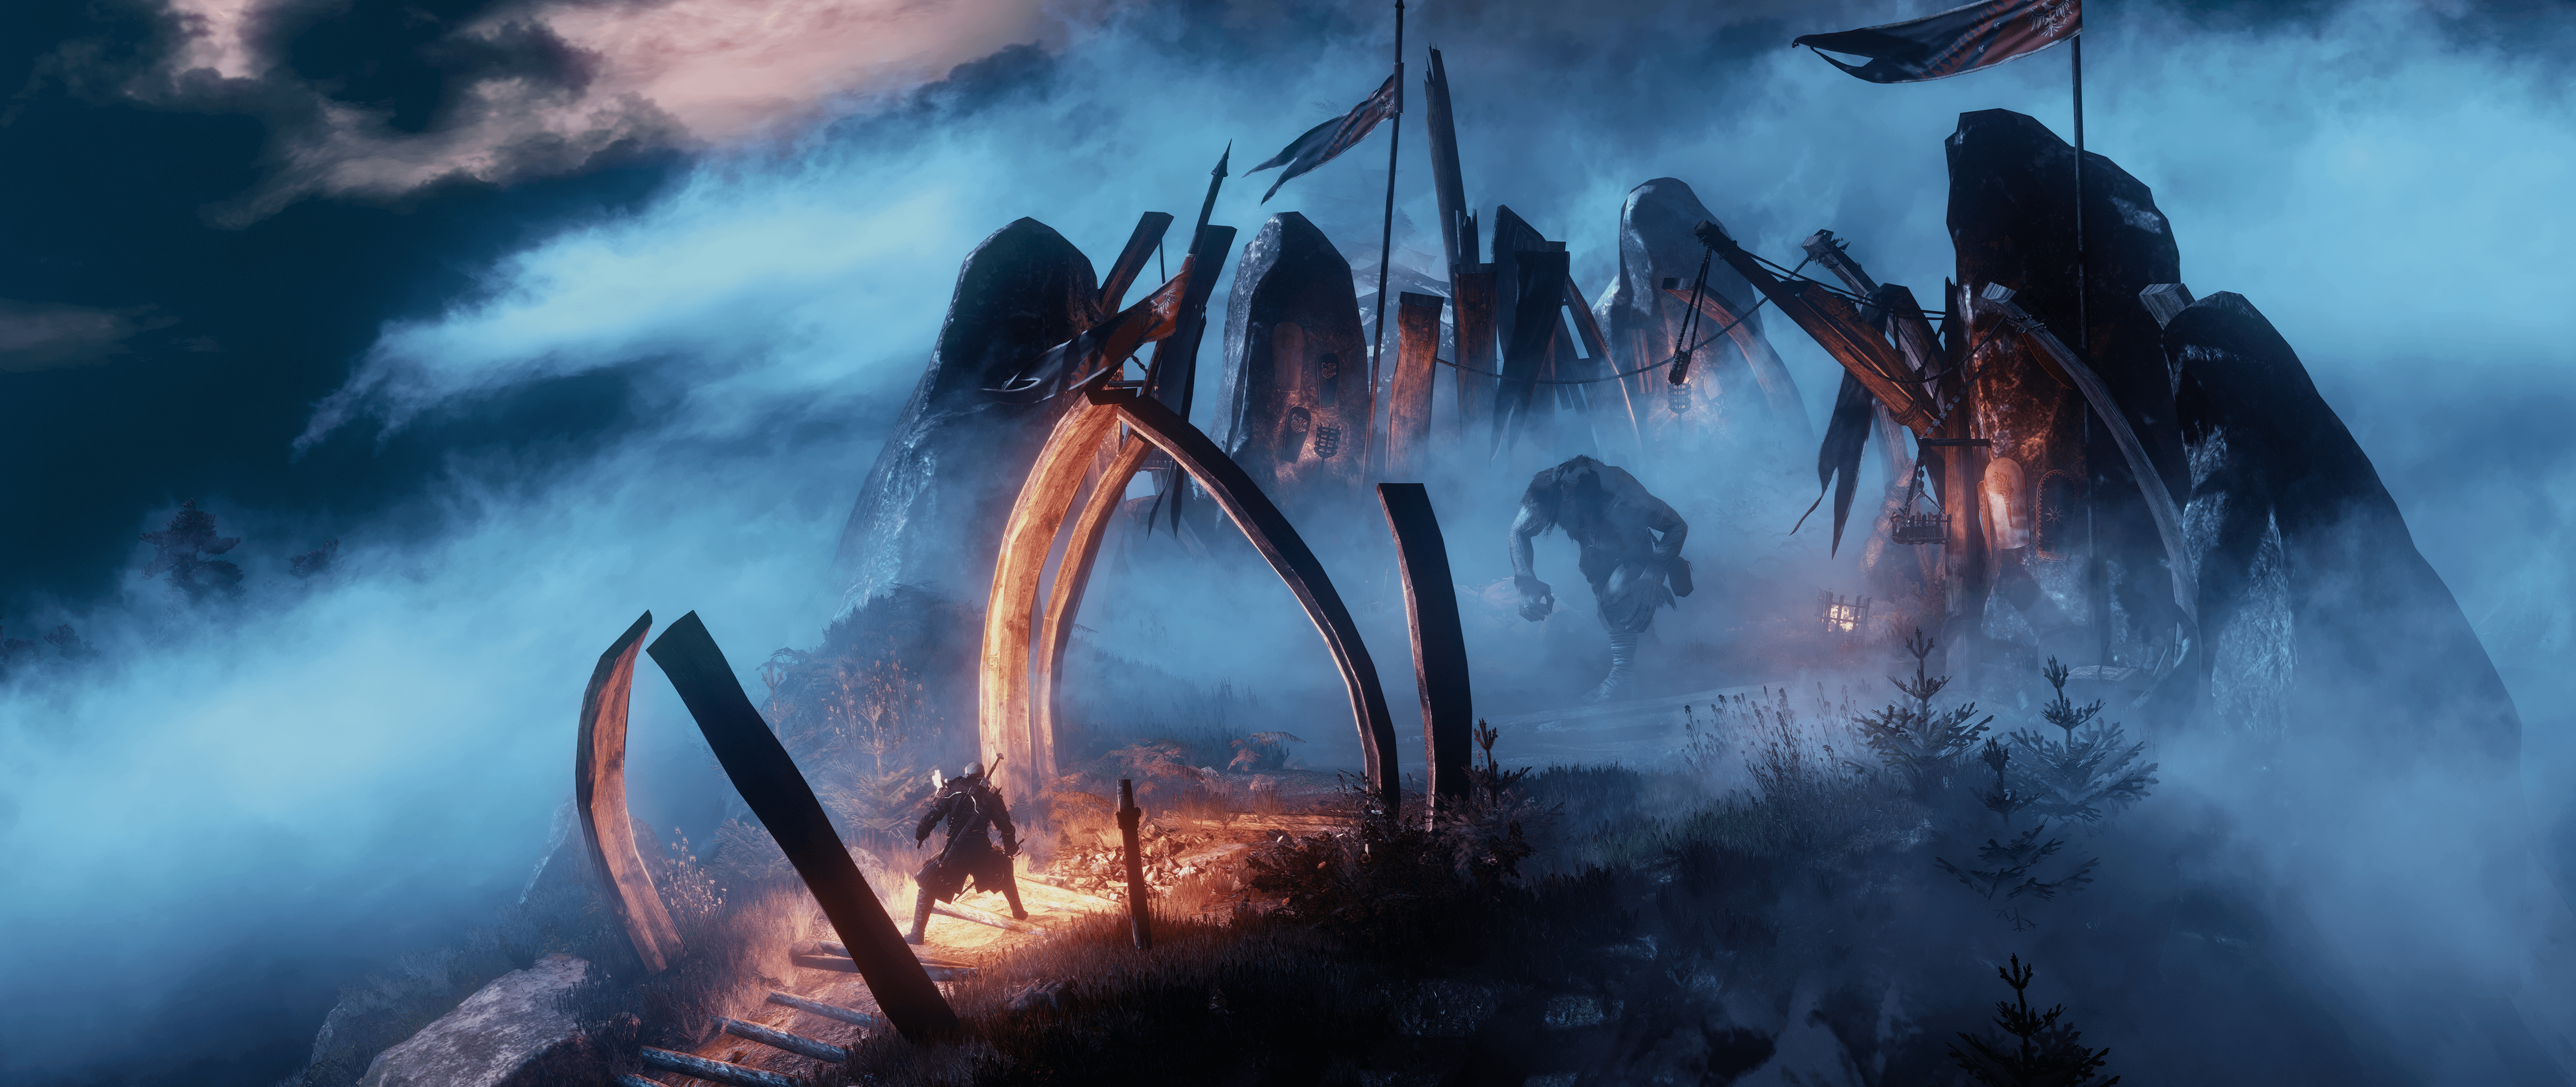 The Witcher 3: Wild Hunt 4k Ultra HD Wallpapers